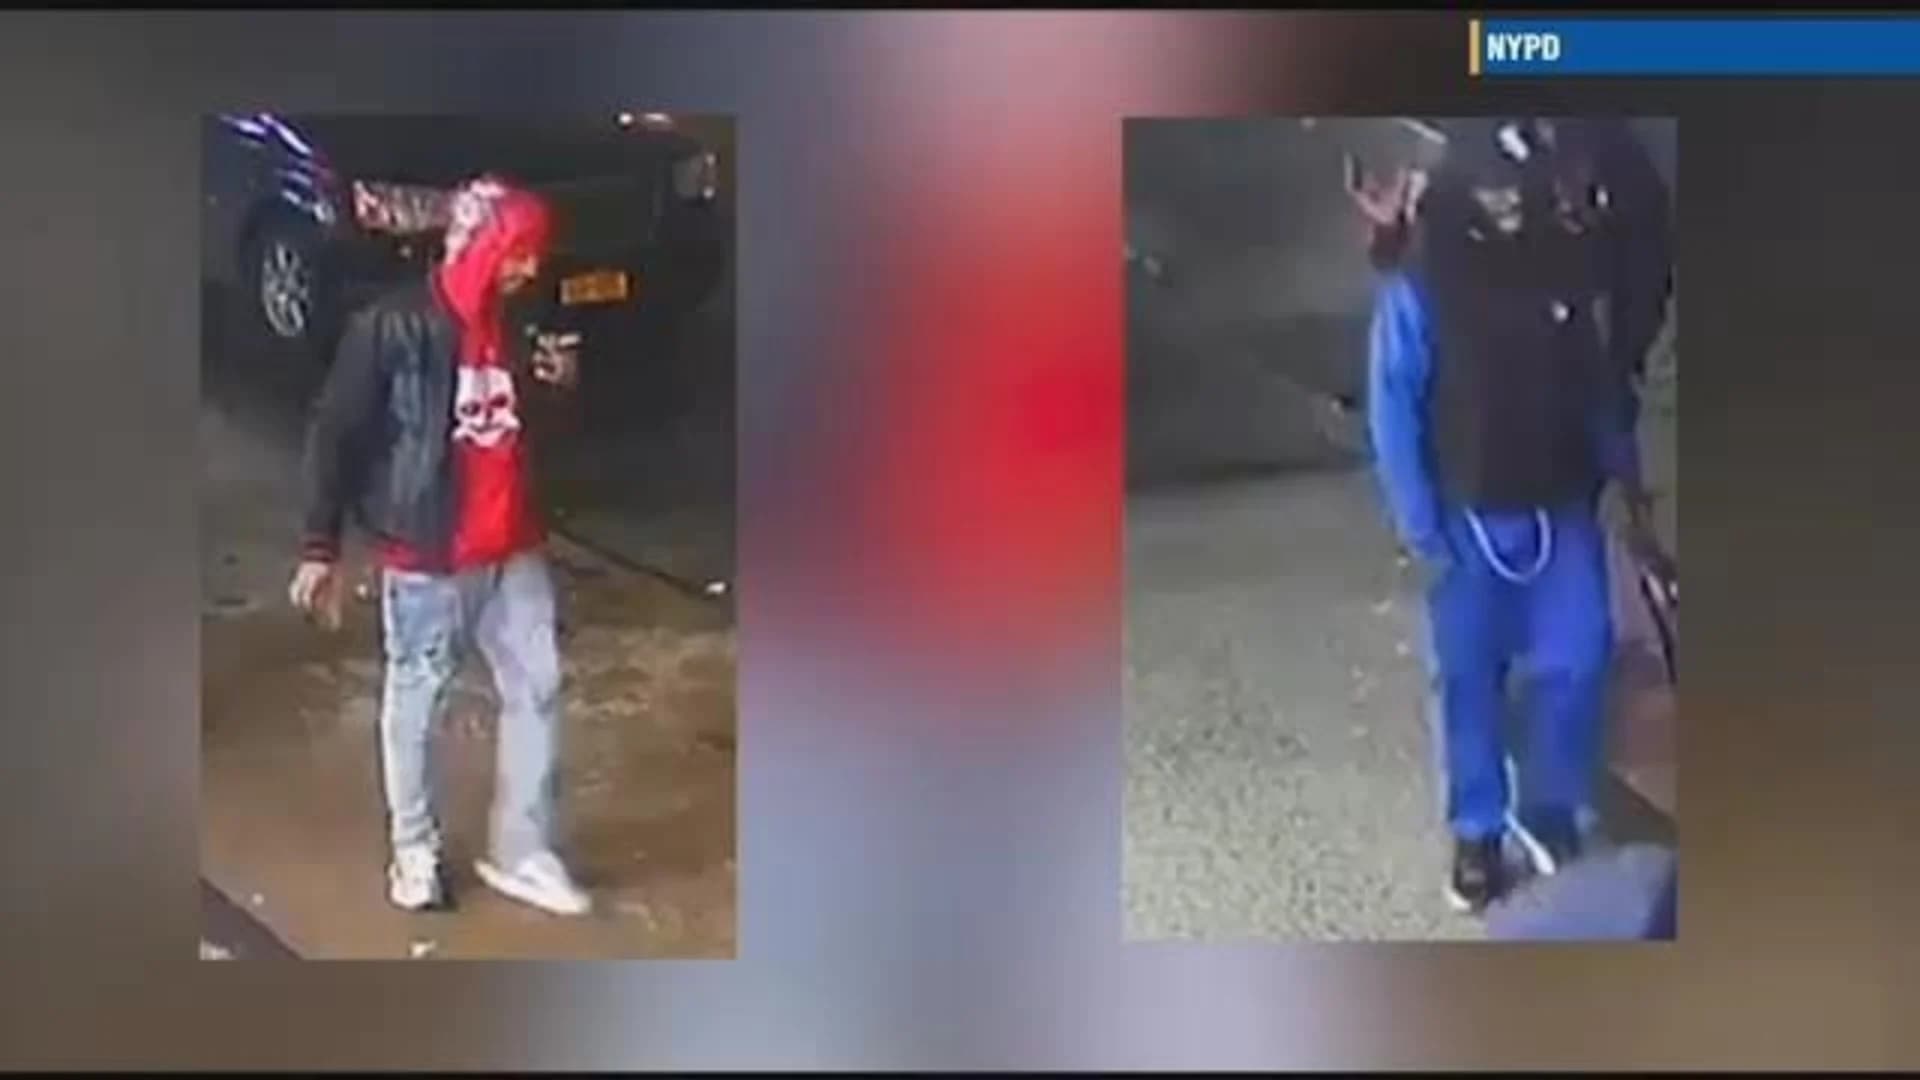 Police: 2 suspects wanted in connection to Longwood assault